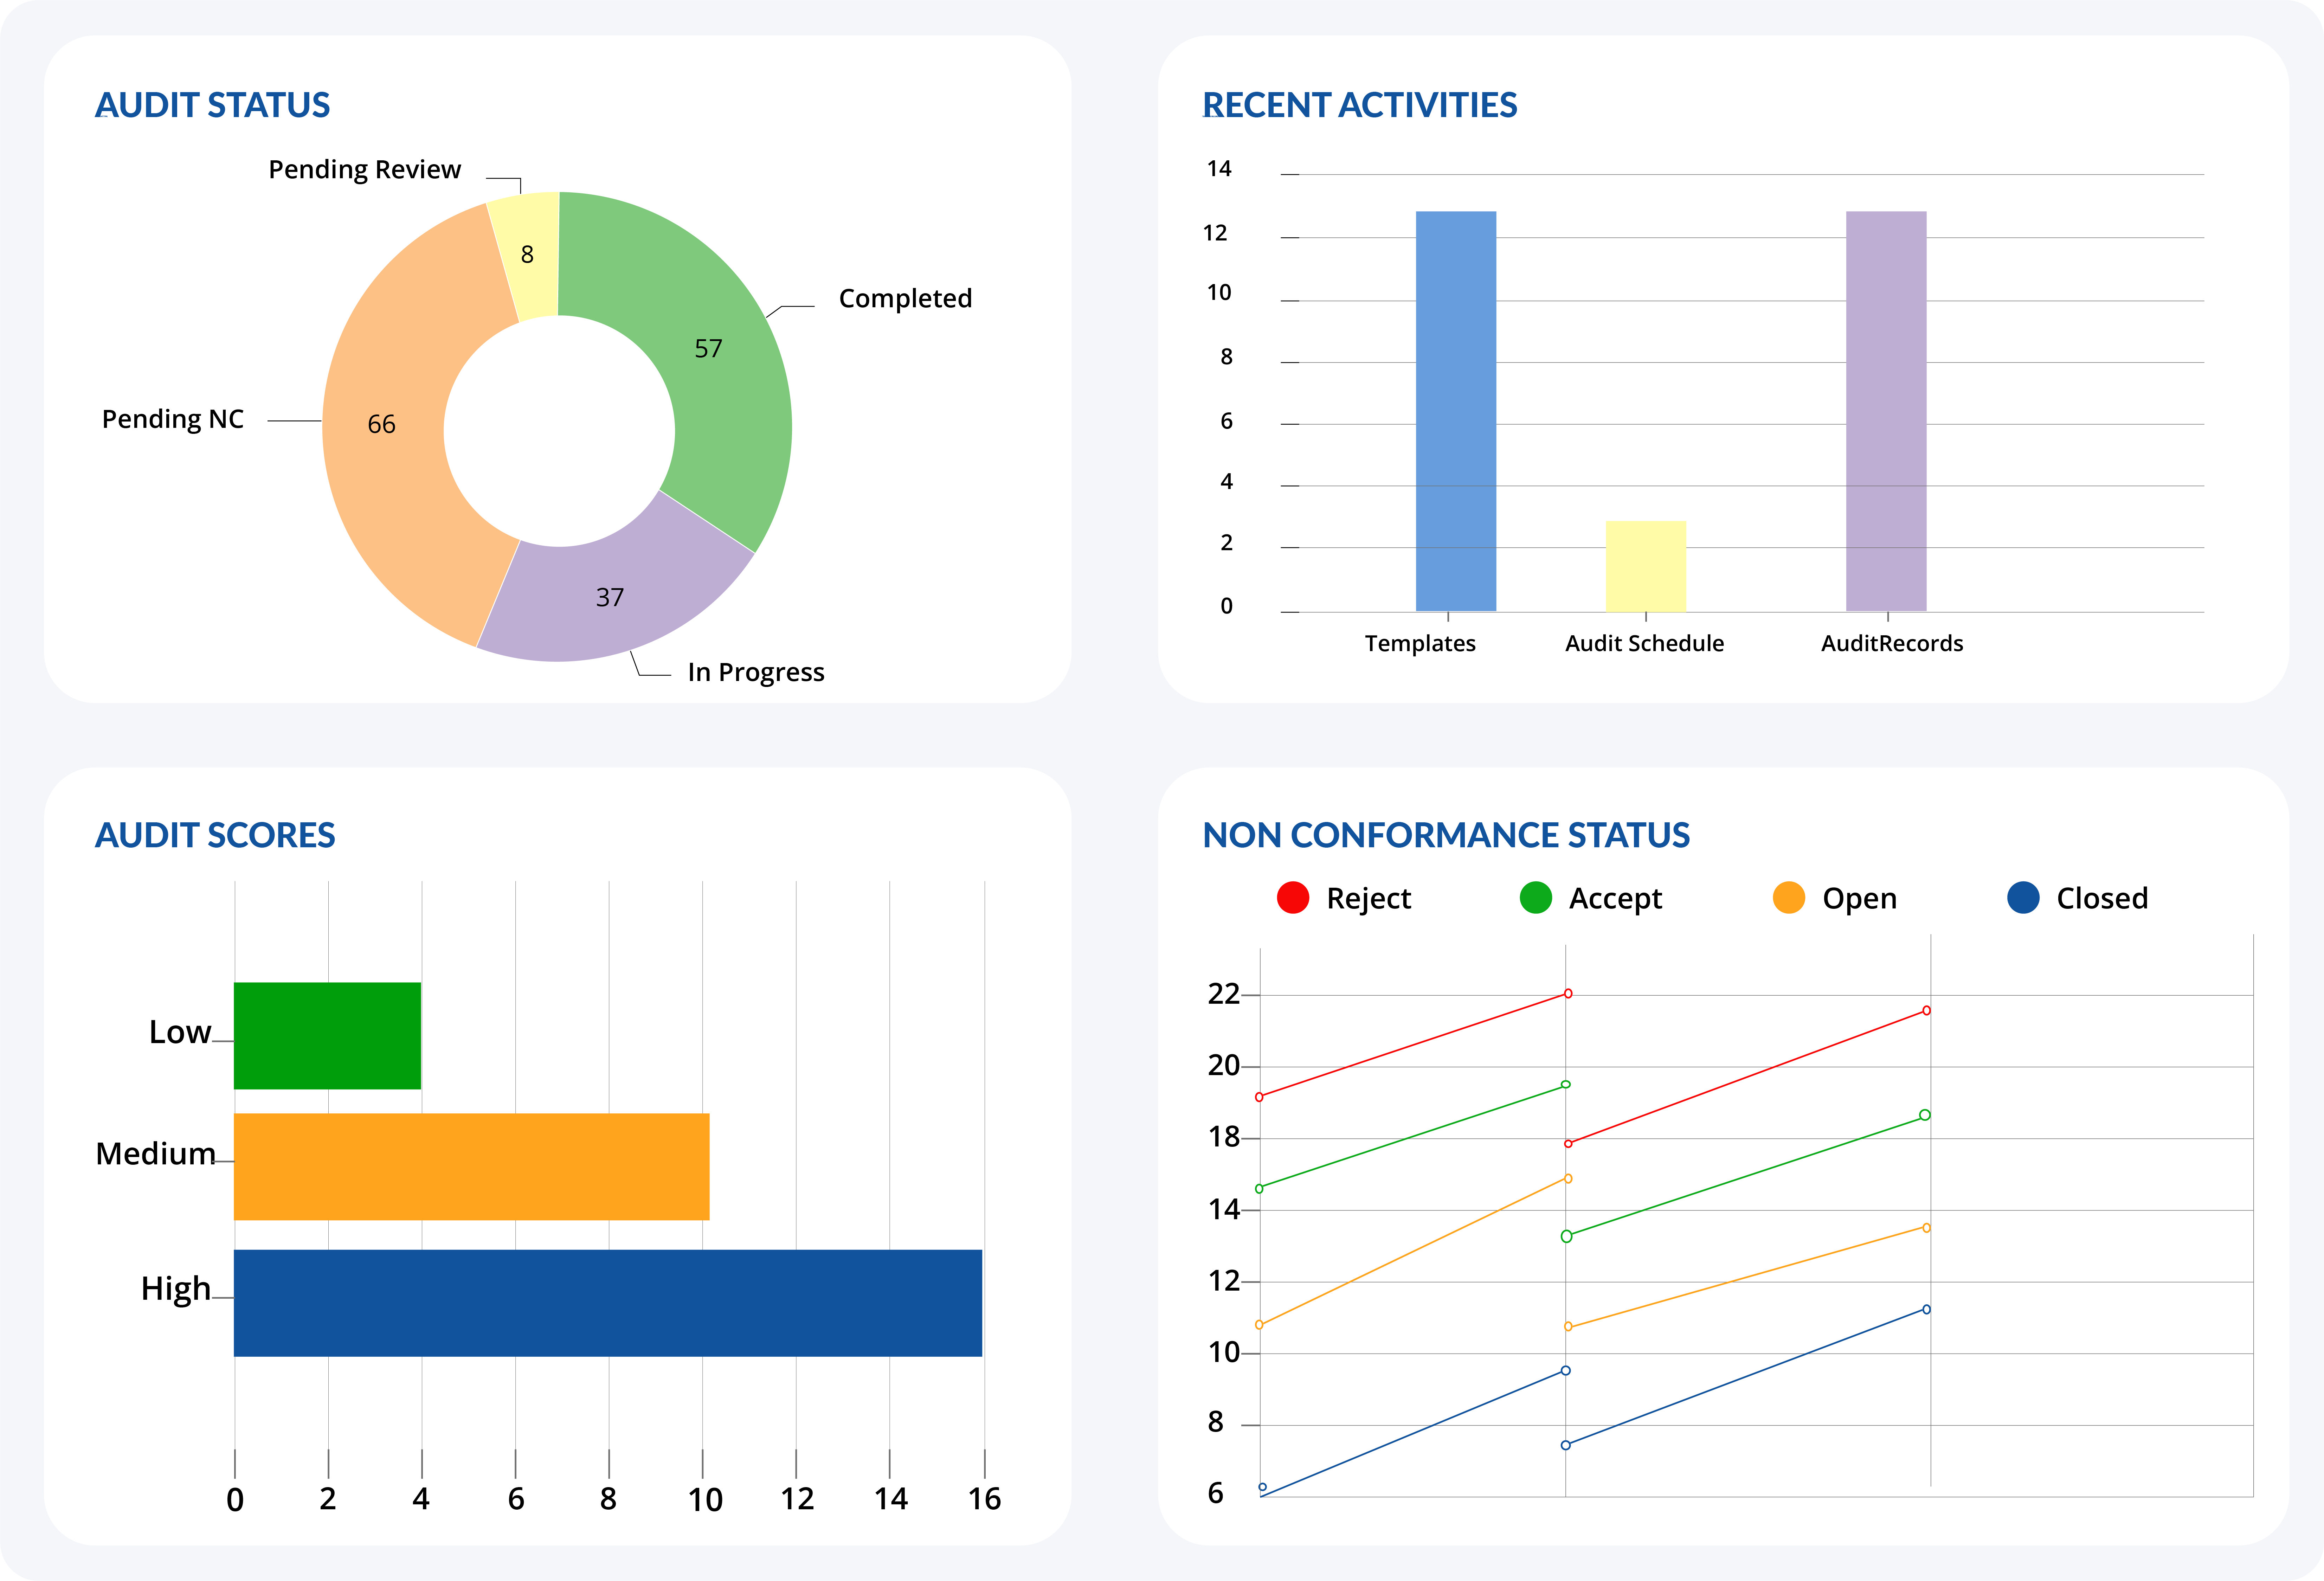 Manage audit outcome trends with configurable dashboards in graphical forms. With predefined and custom reporting, identify and act on the trends before they become practices. Export the data into excel or graphs for internal communications.